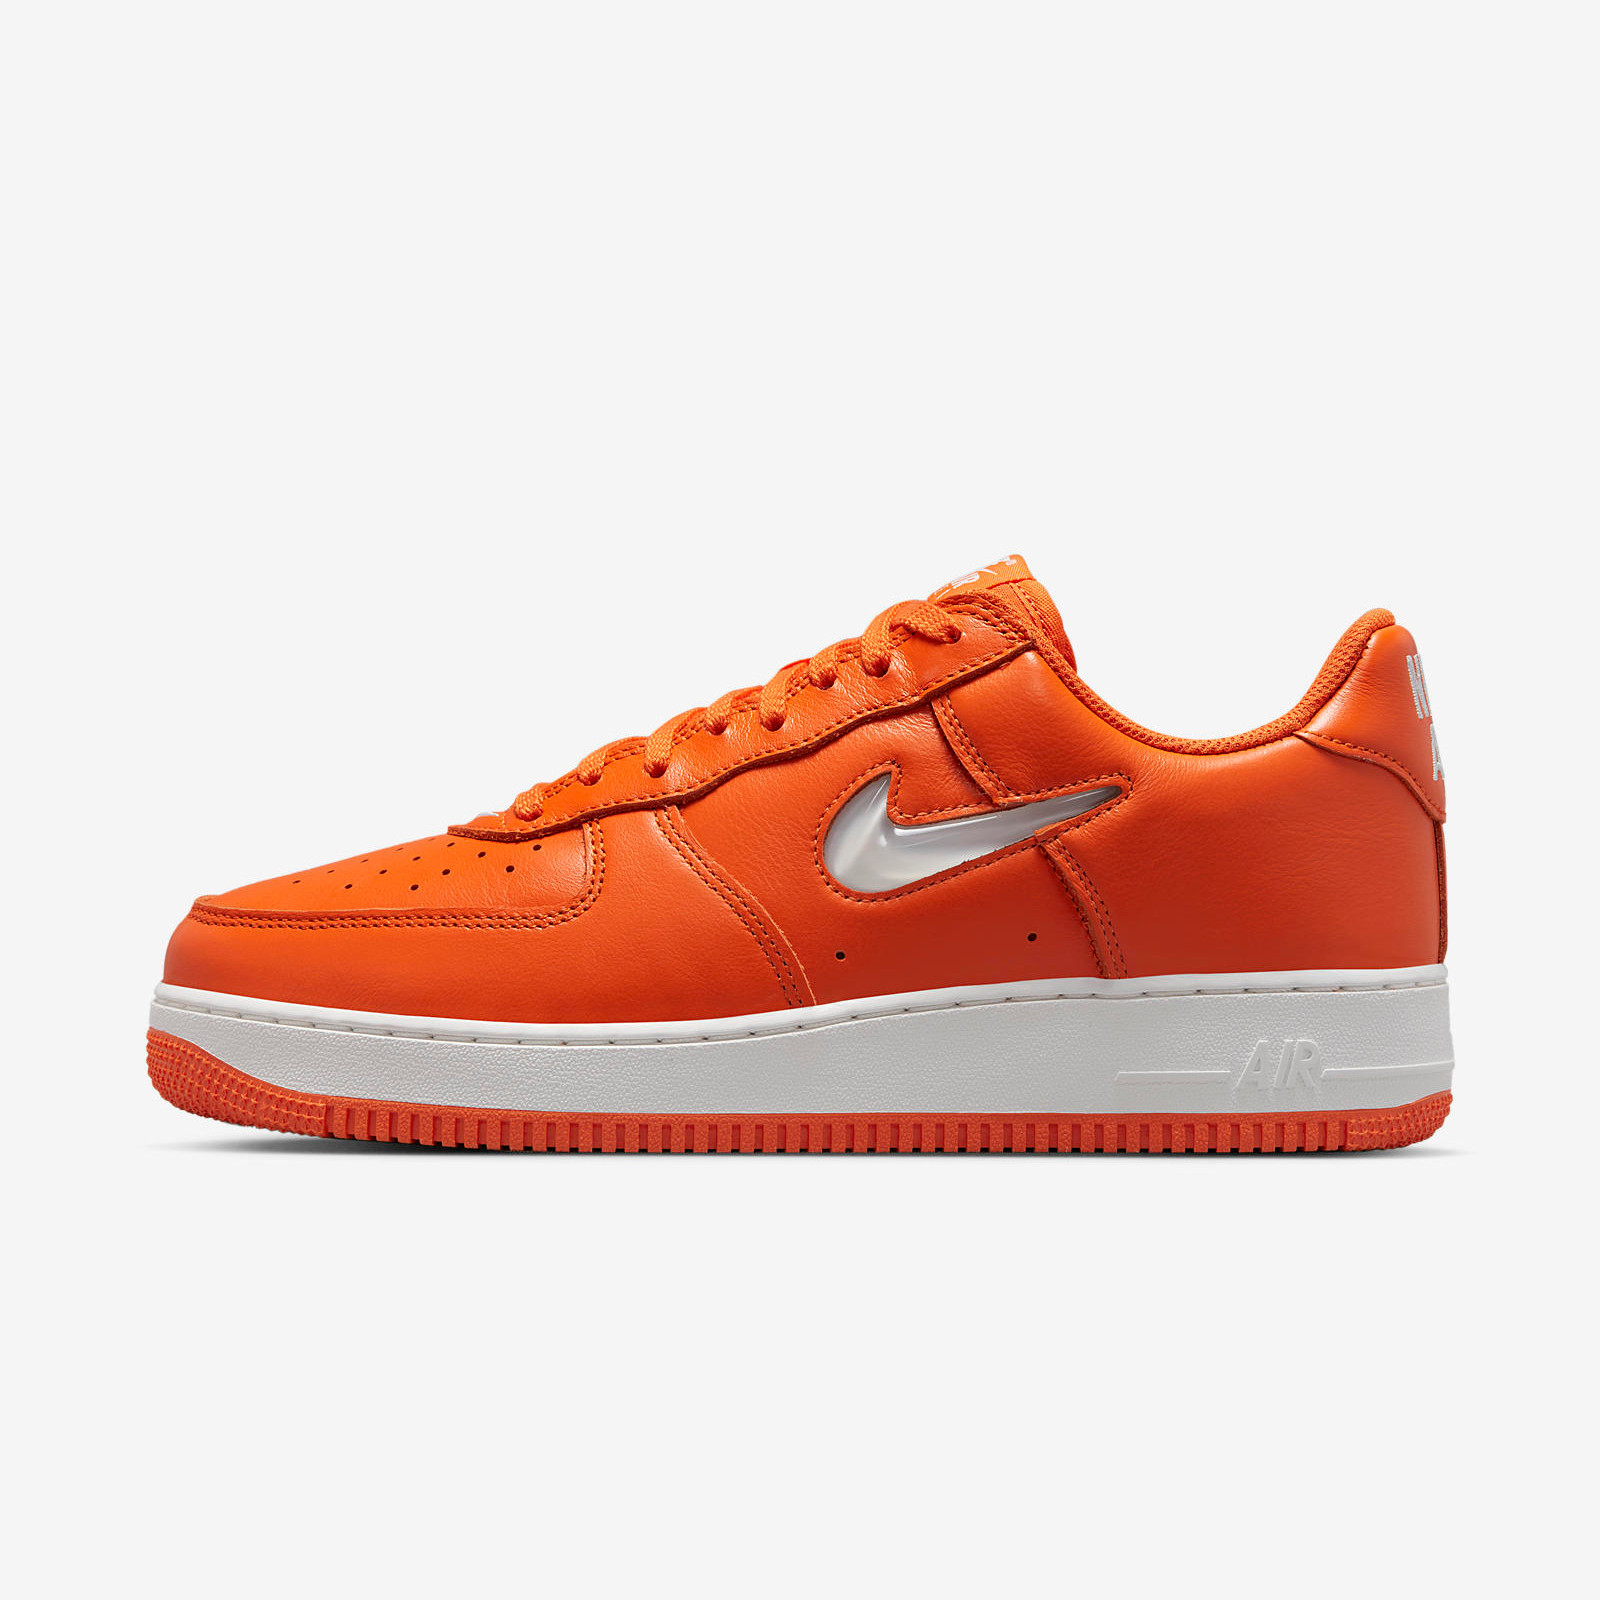 Nike Air Force 1
Color of the Month
« Safety Orange »